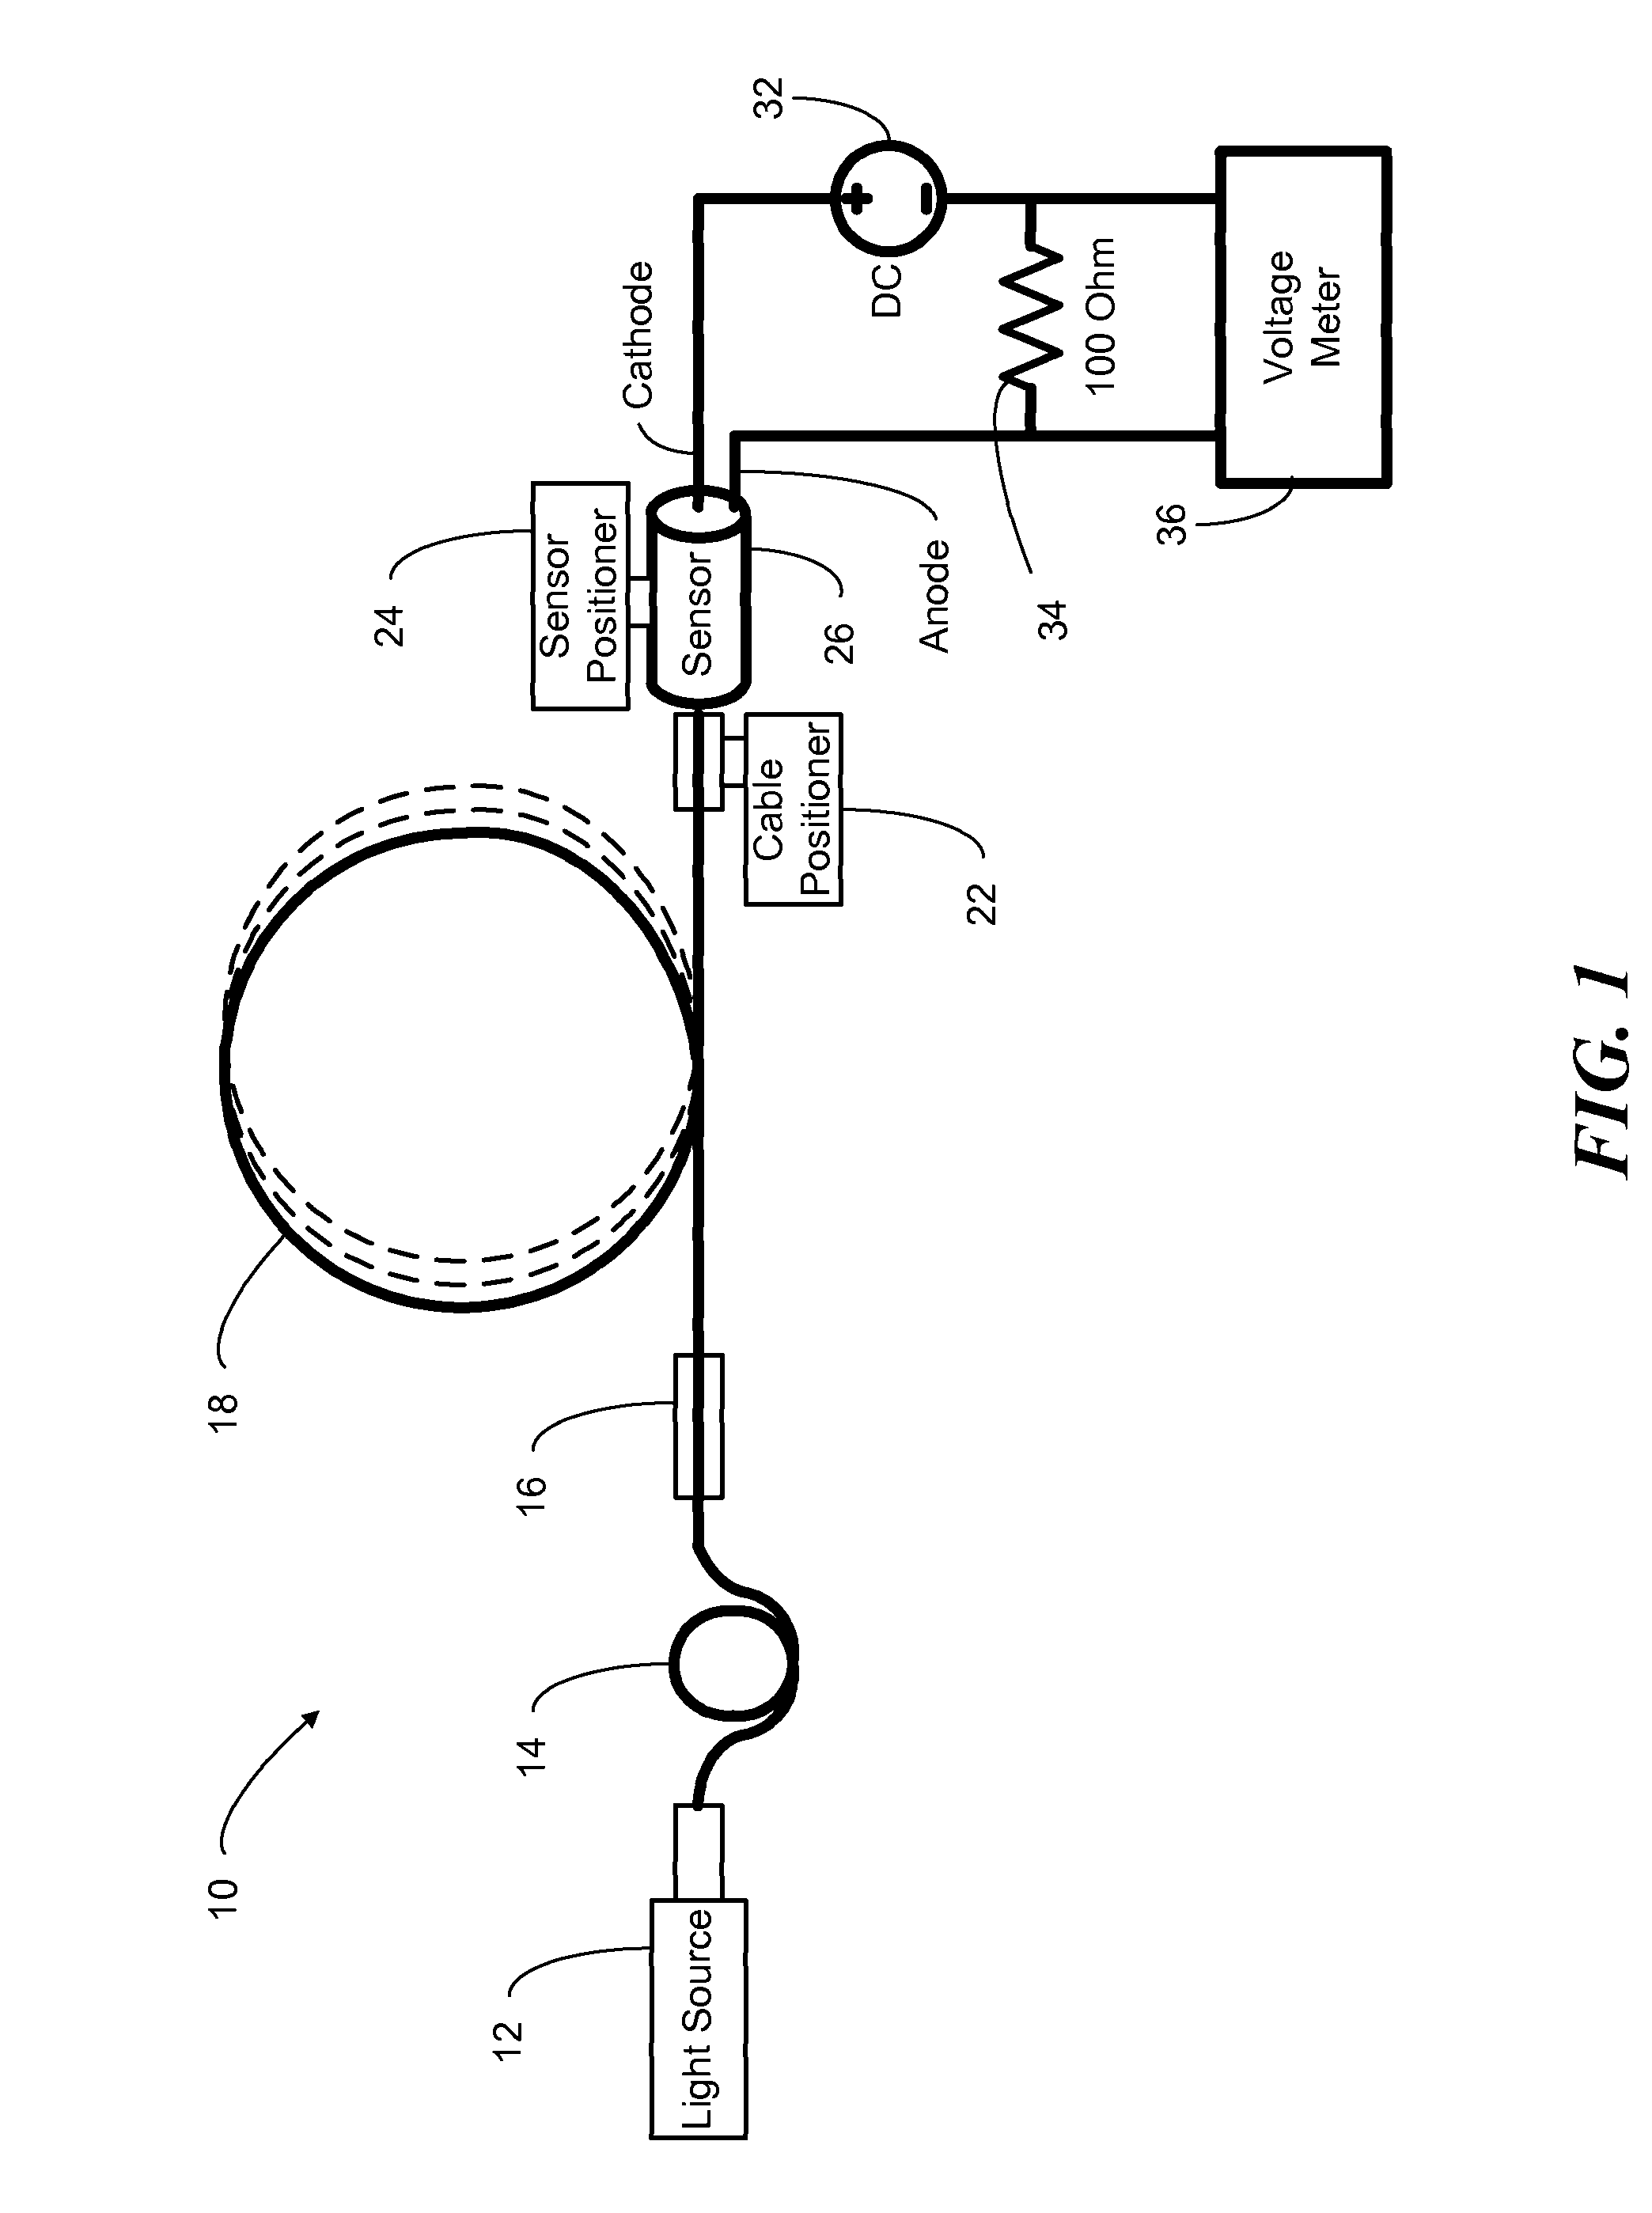 Method and system for coupling multimode optical fiber to an optical detector